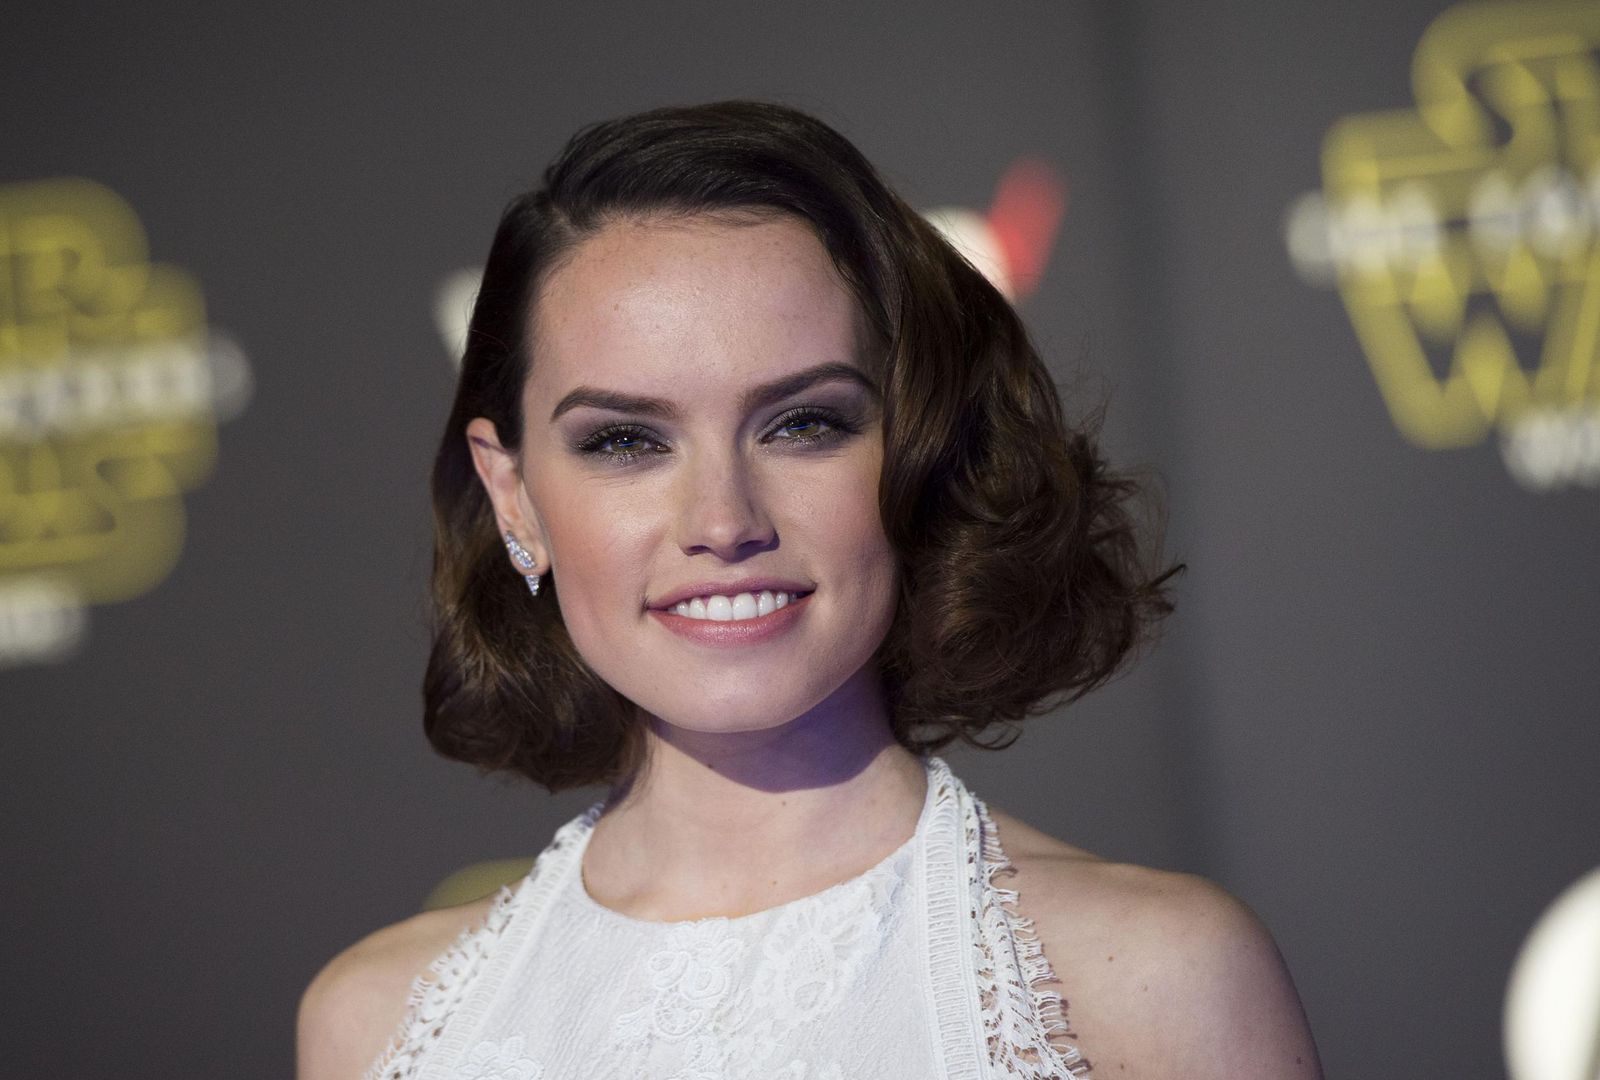 Daisy Ridley Just Can't Take The Whole Attention Coming Her Way